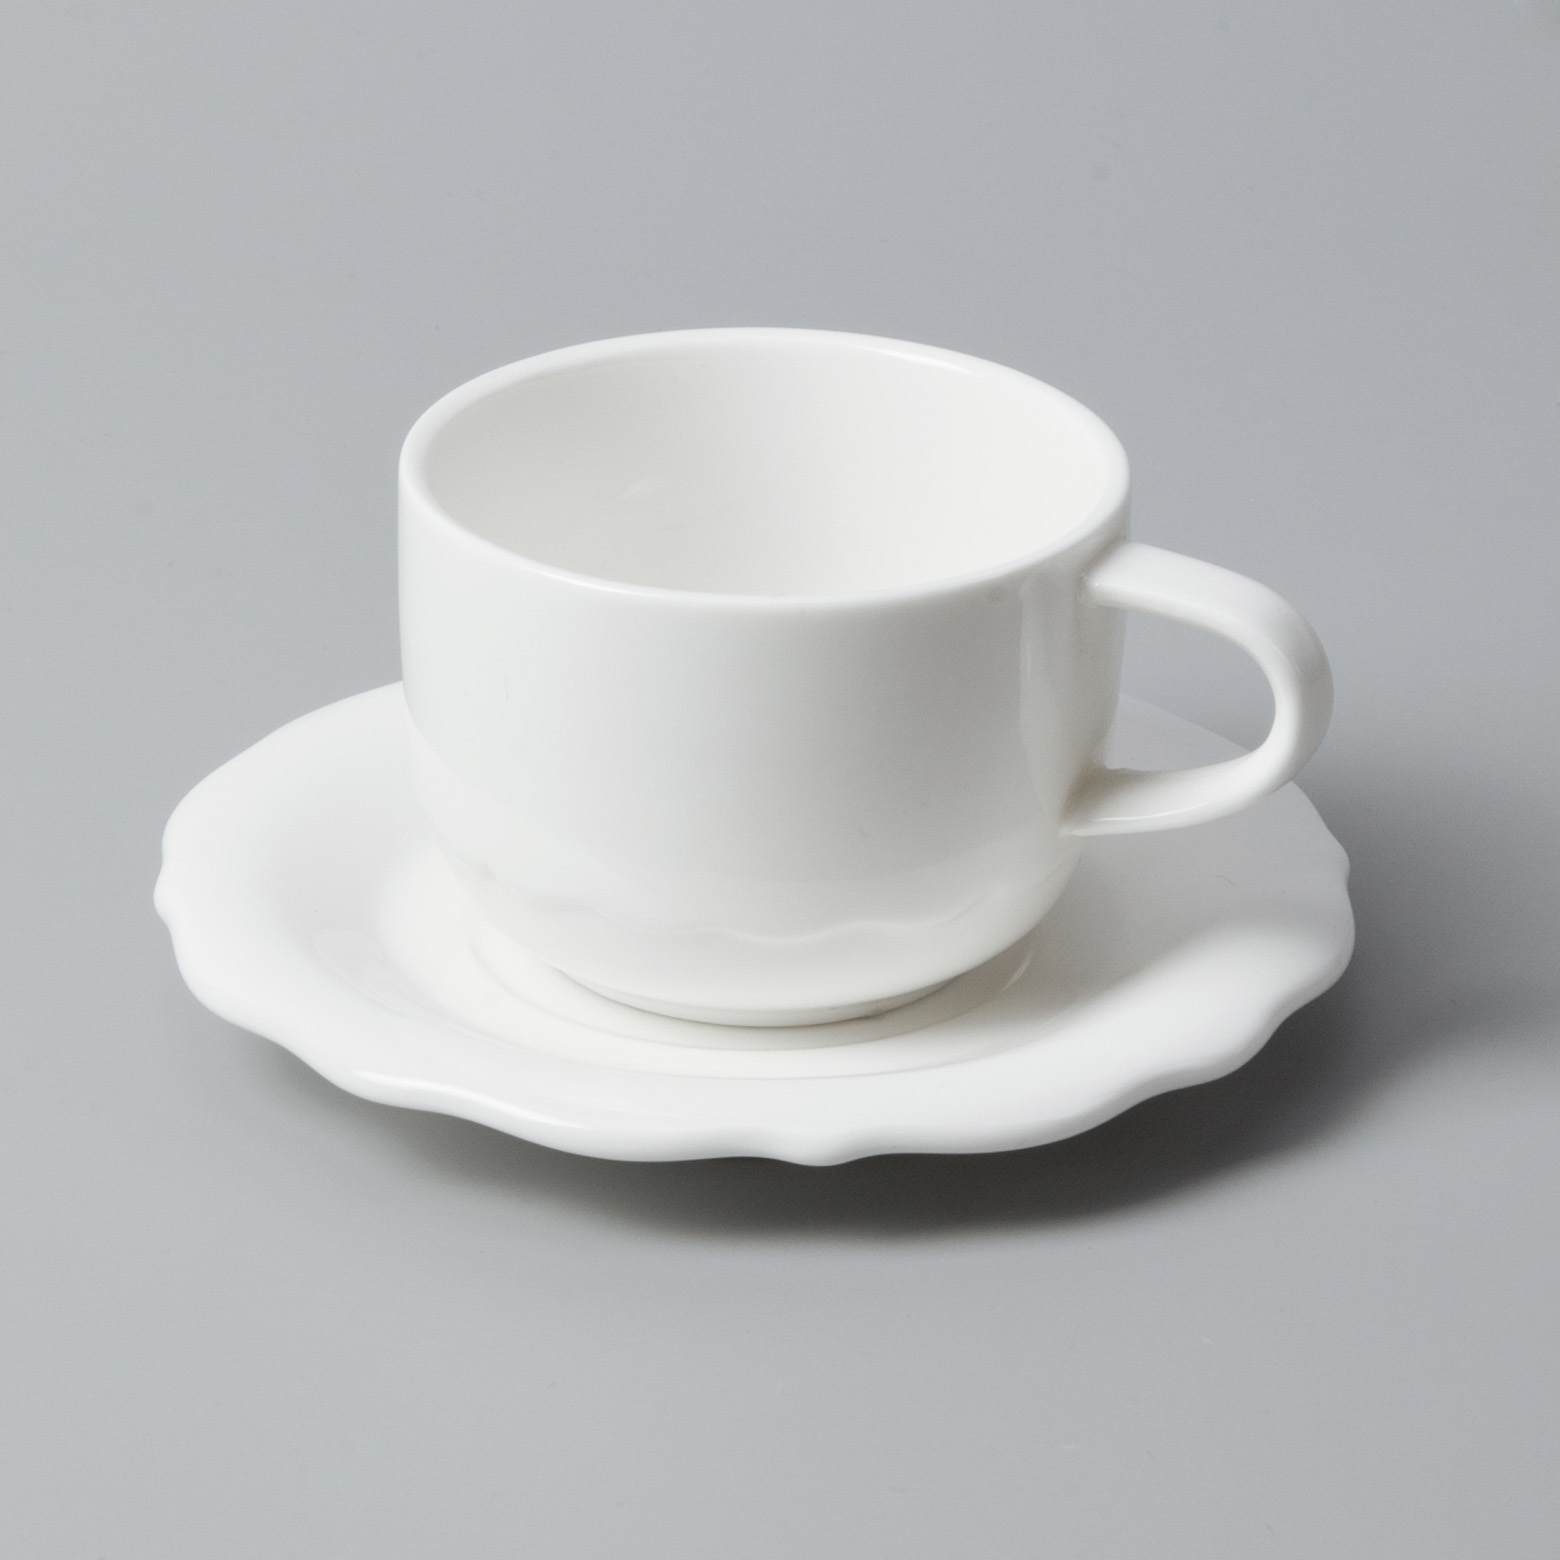 modern porcelain dinnerware sets french style for dinner Two Eight